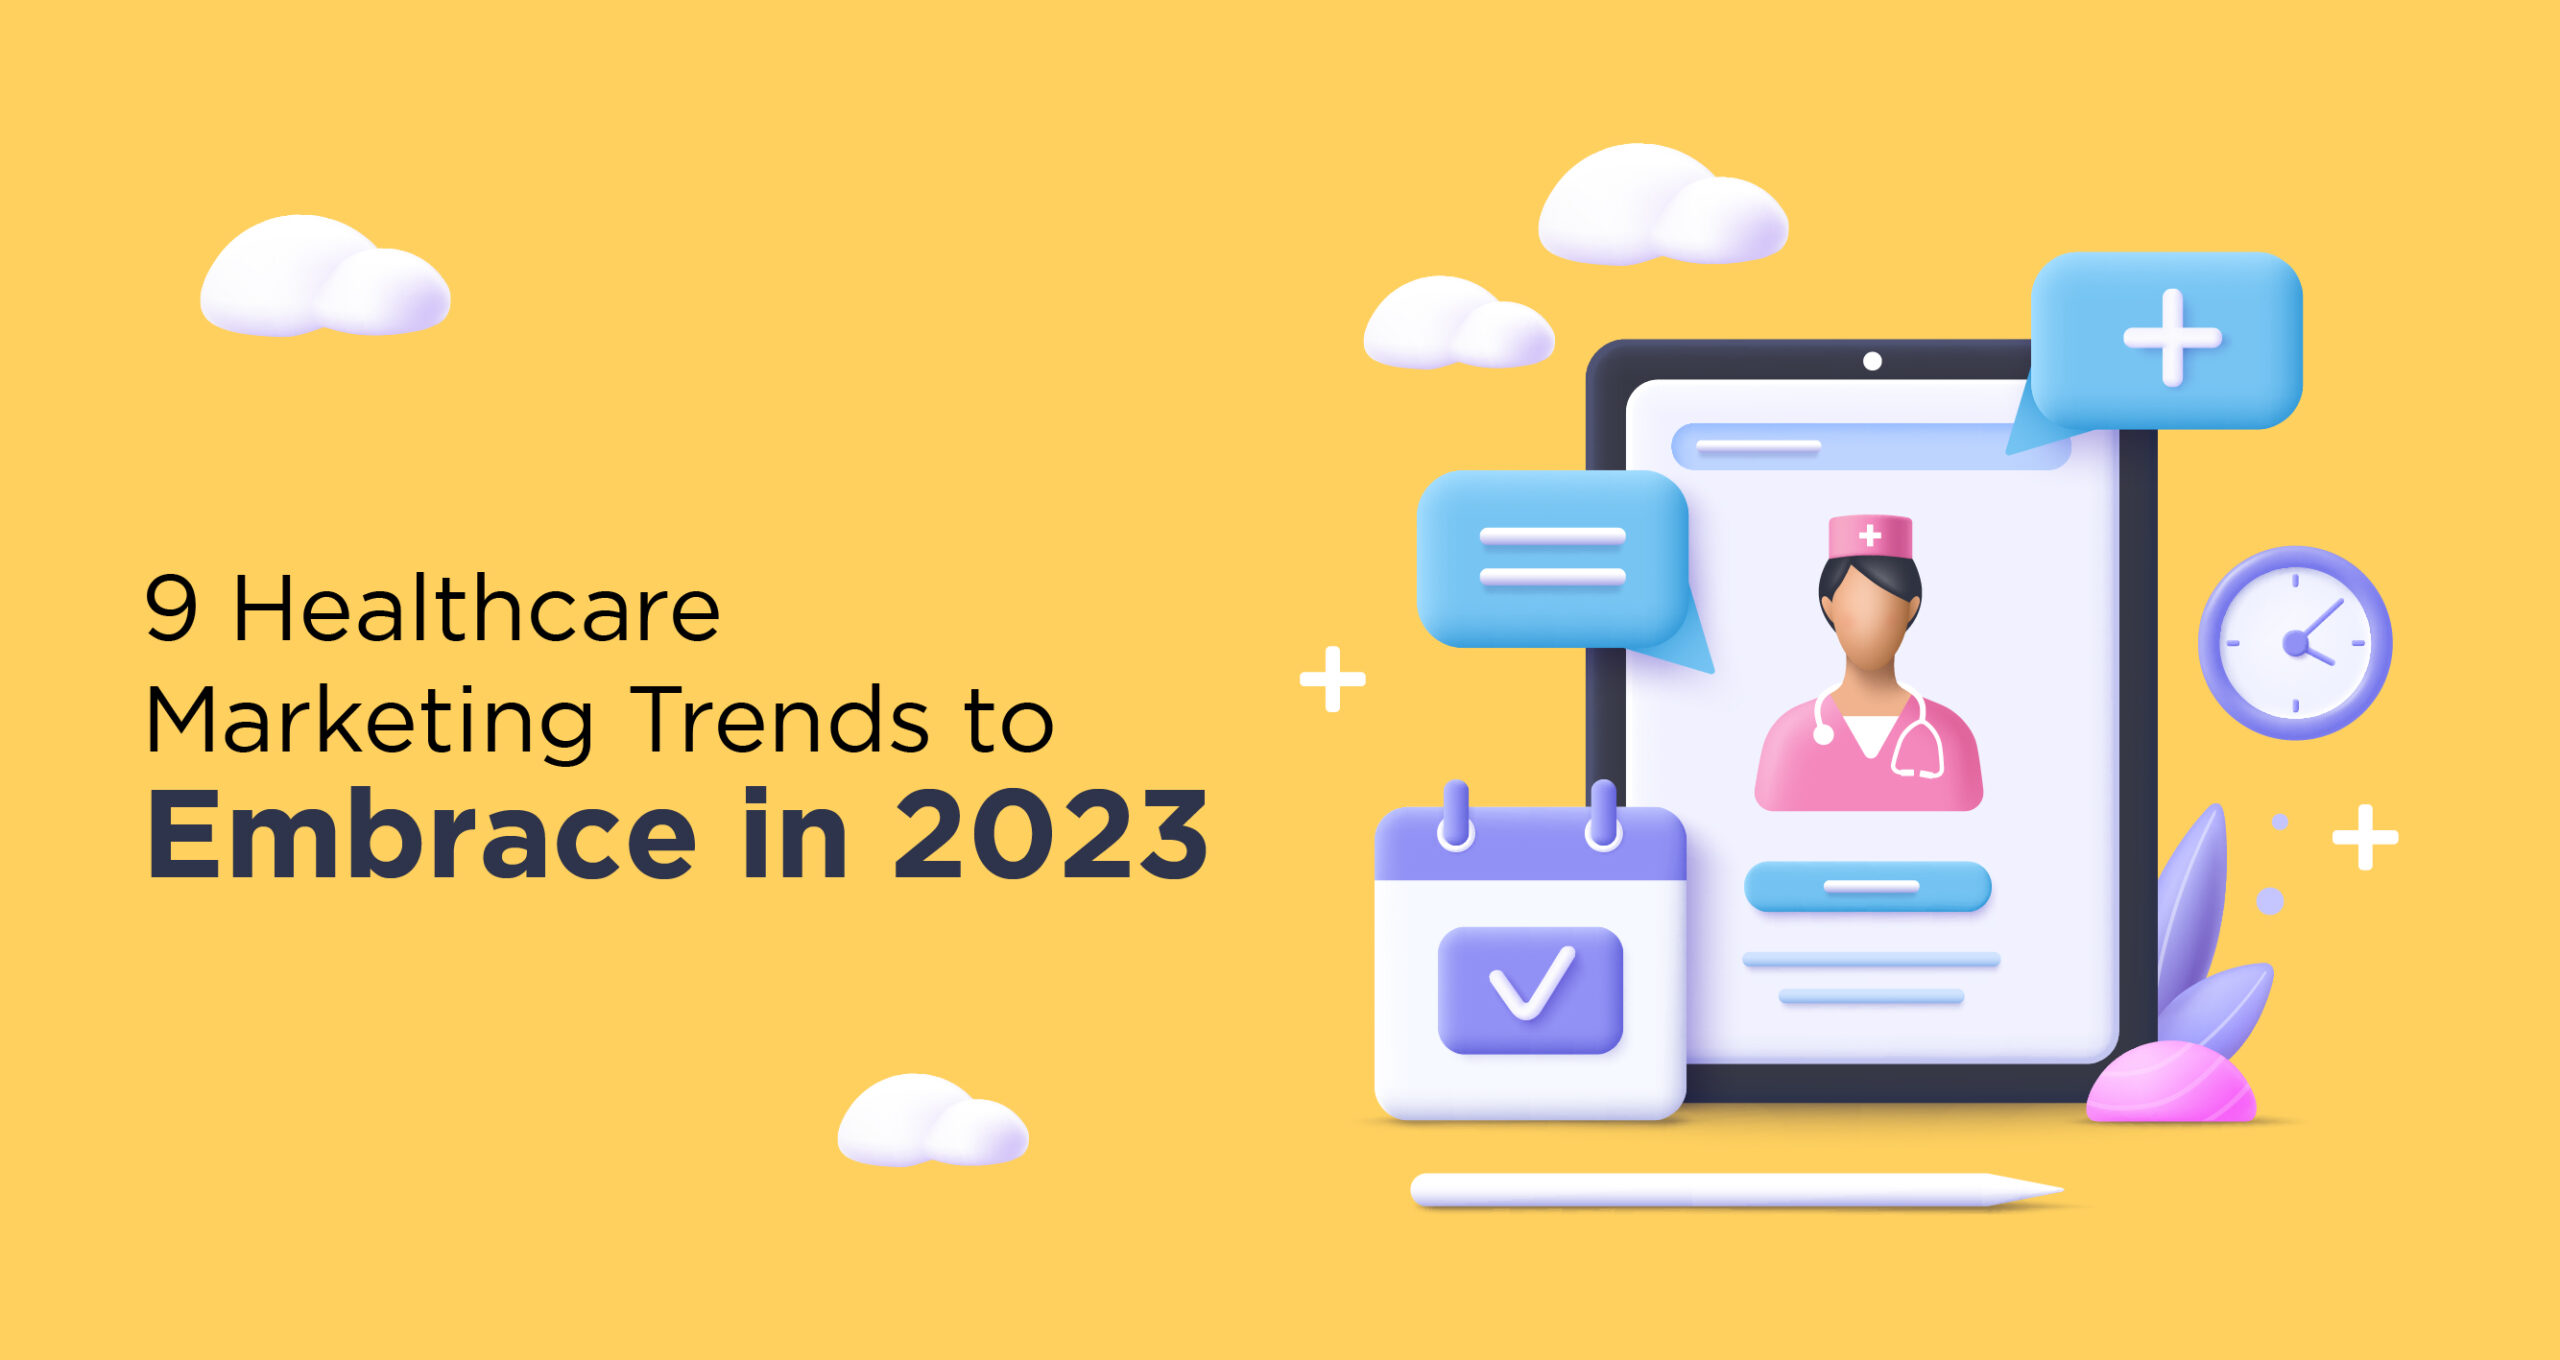 Healthcare Marketing Trends to Embrace in 2023